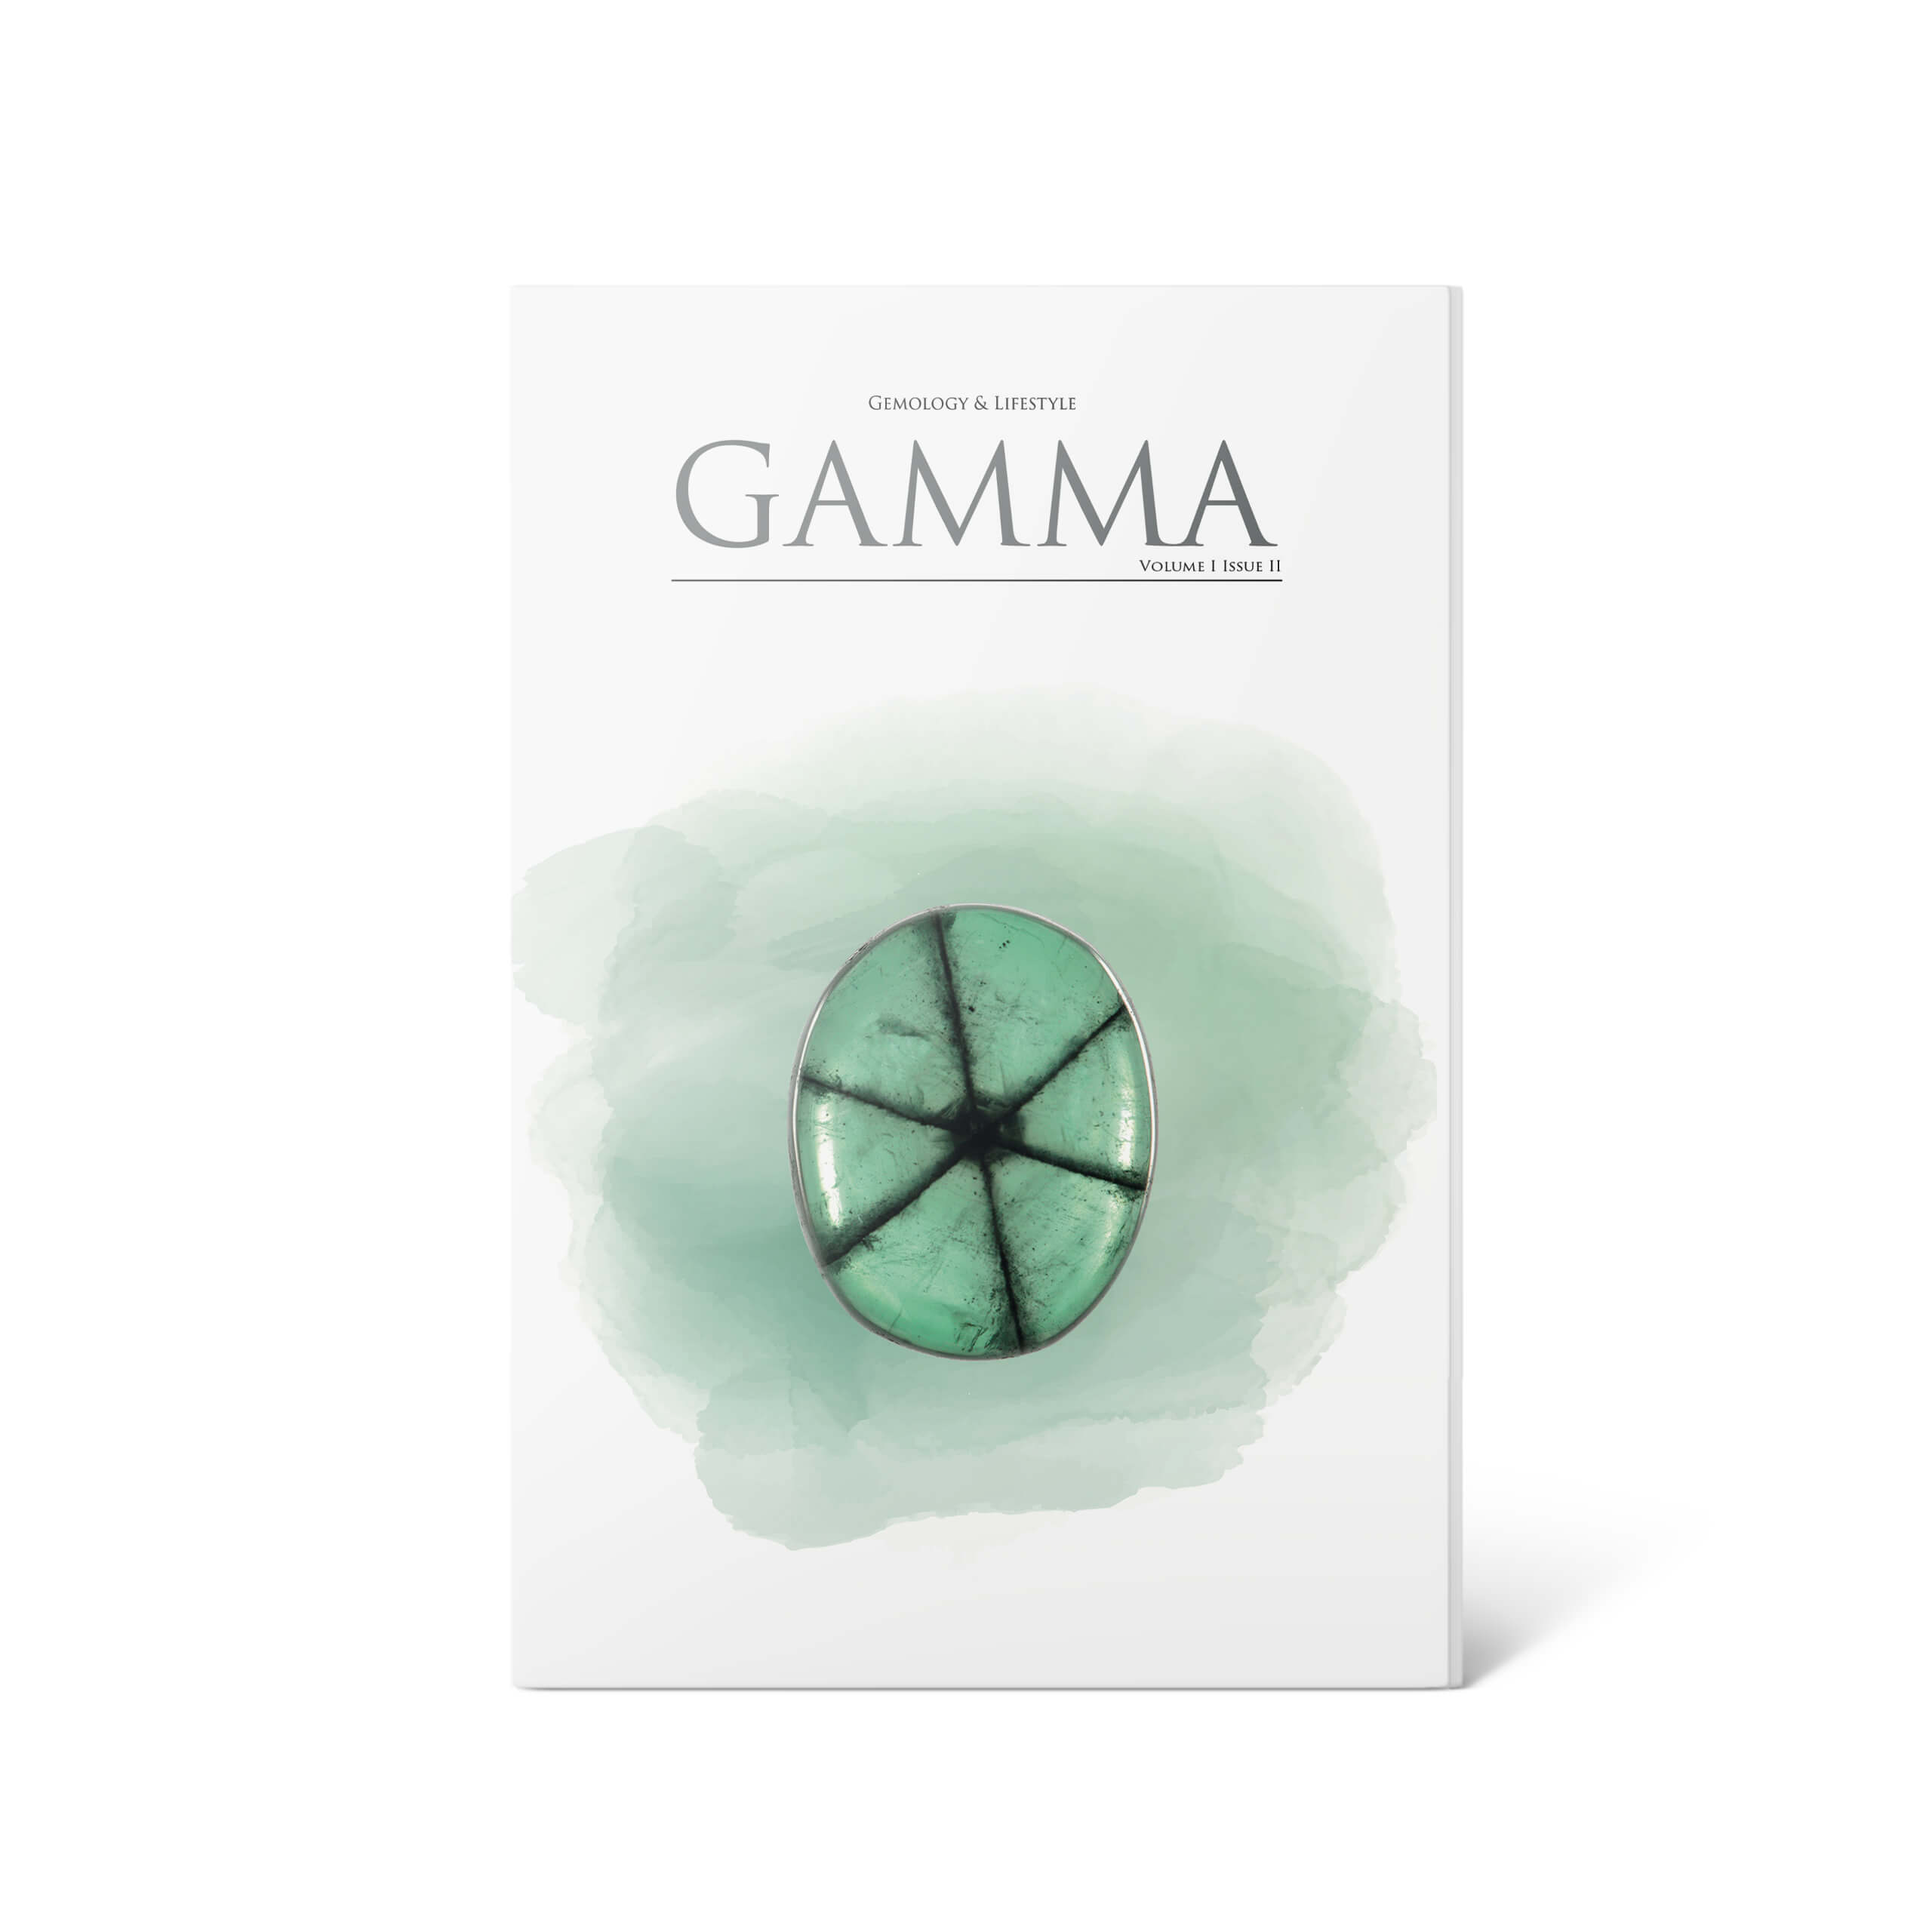 Gamma the ICA GemLab Gemmological journal. Volume 1 issue 2. On our cover we have a trapiche emerald entrusted to ICA |GemLab for research purposes.